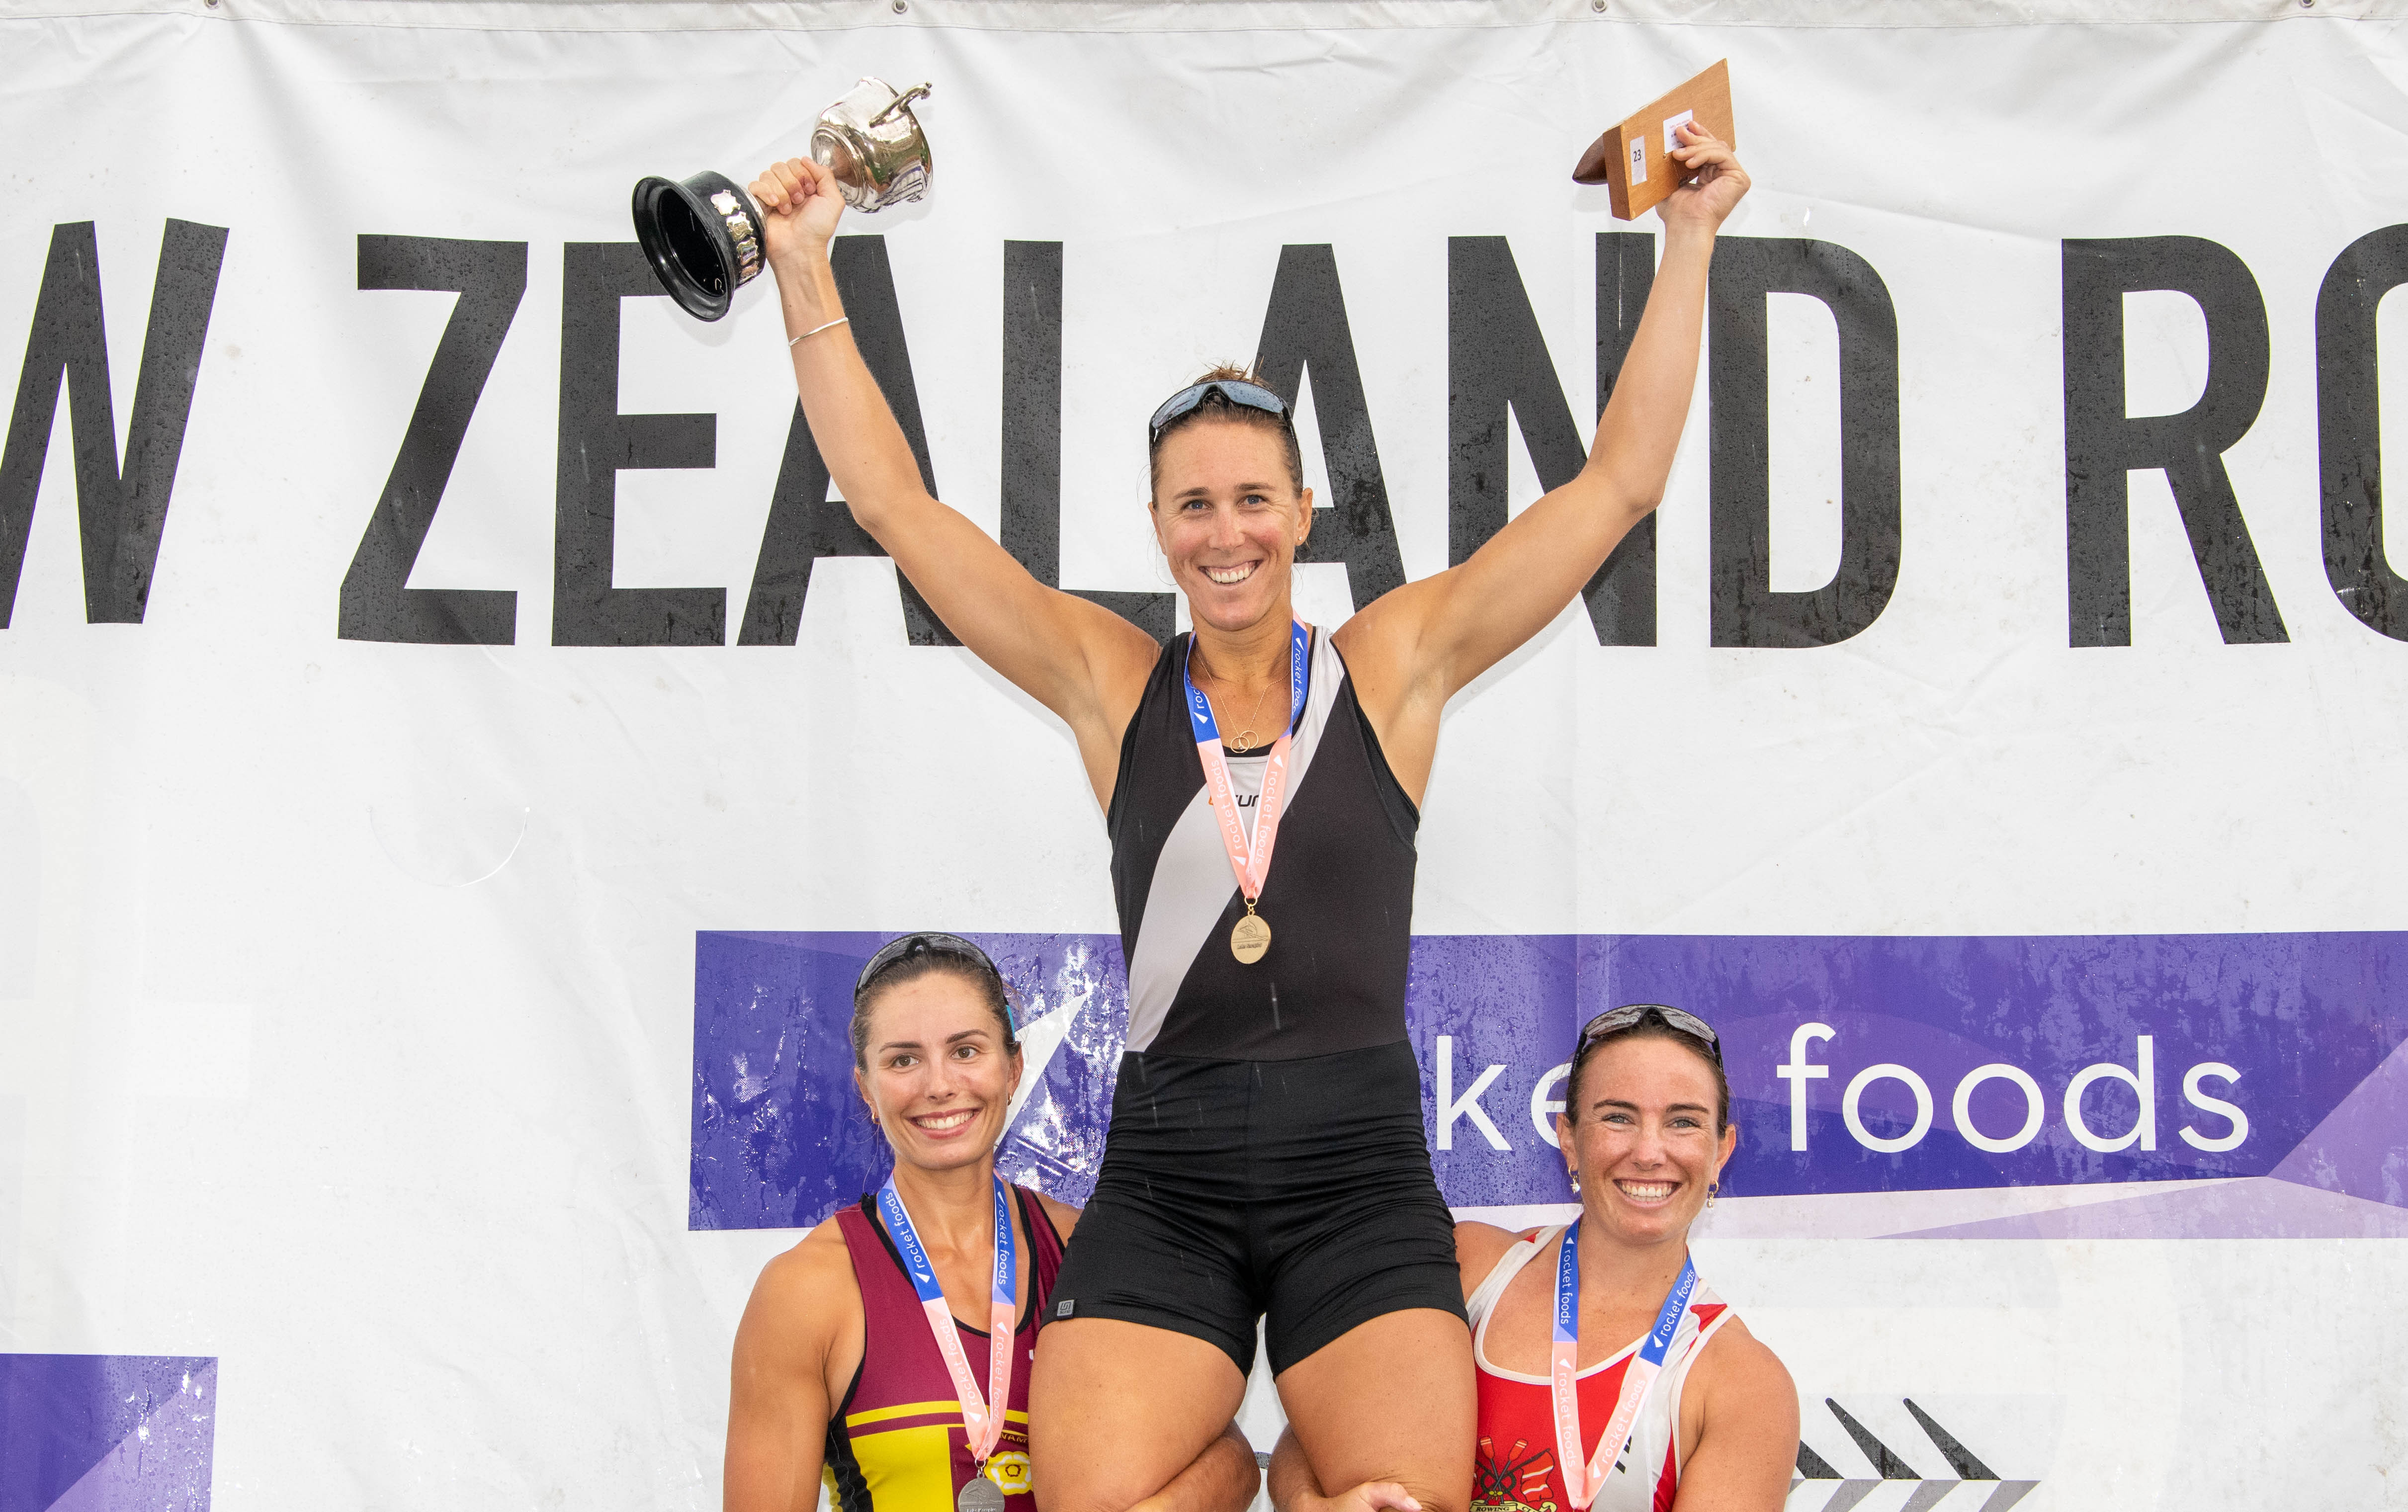 Weekly Wrap Nz Record For Javelin Thrower 9th National Title For